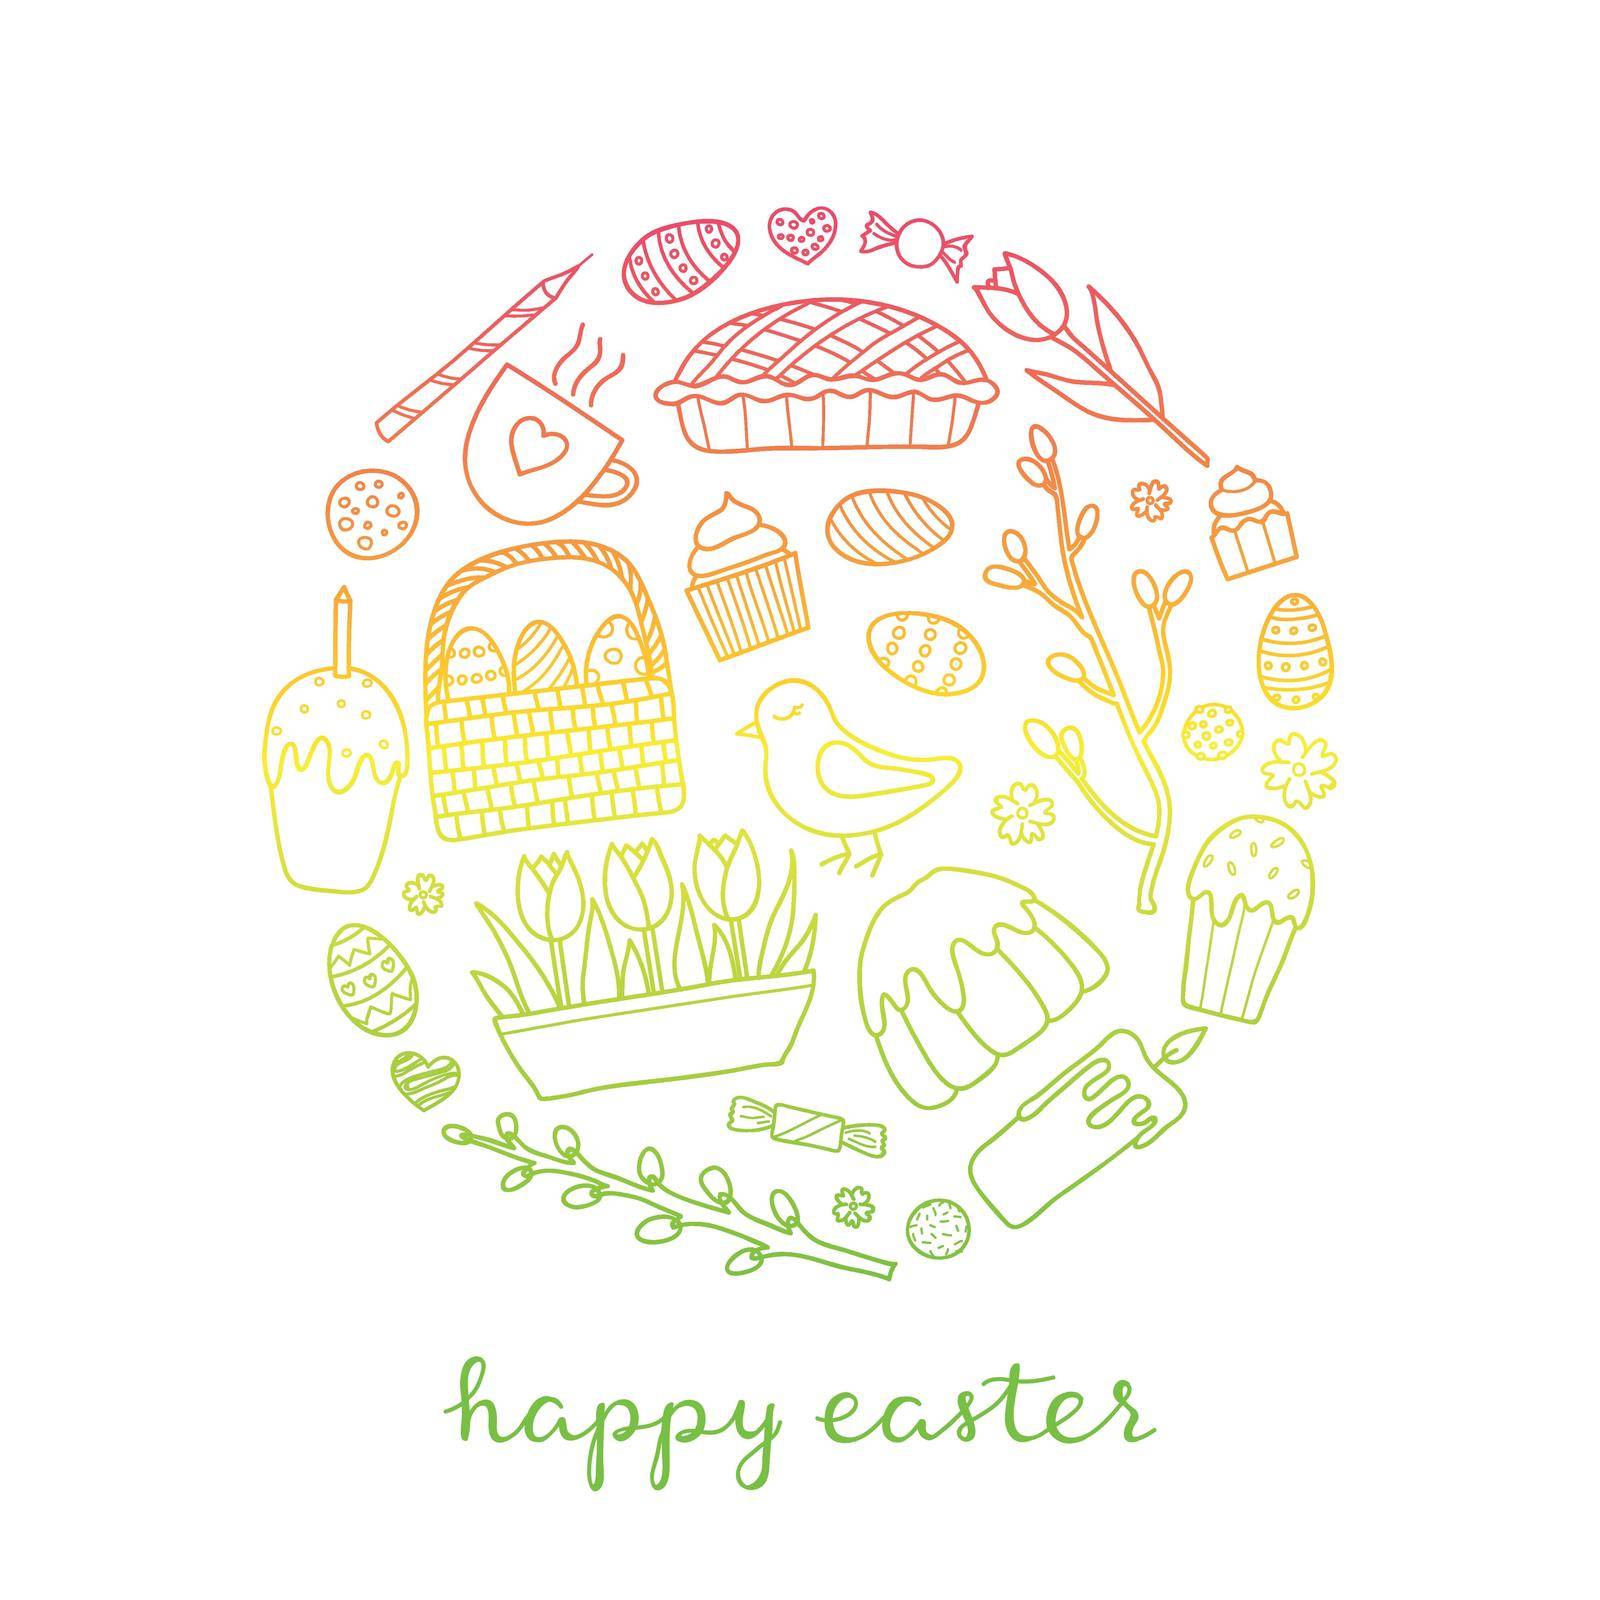 Traditional doodle outline easter items including colored eggs, tulips, glazed cake, candle, bird and pussy willow composed in circle shape with lettering.